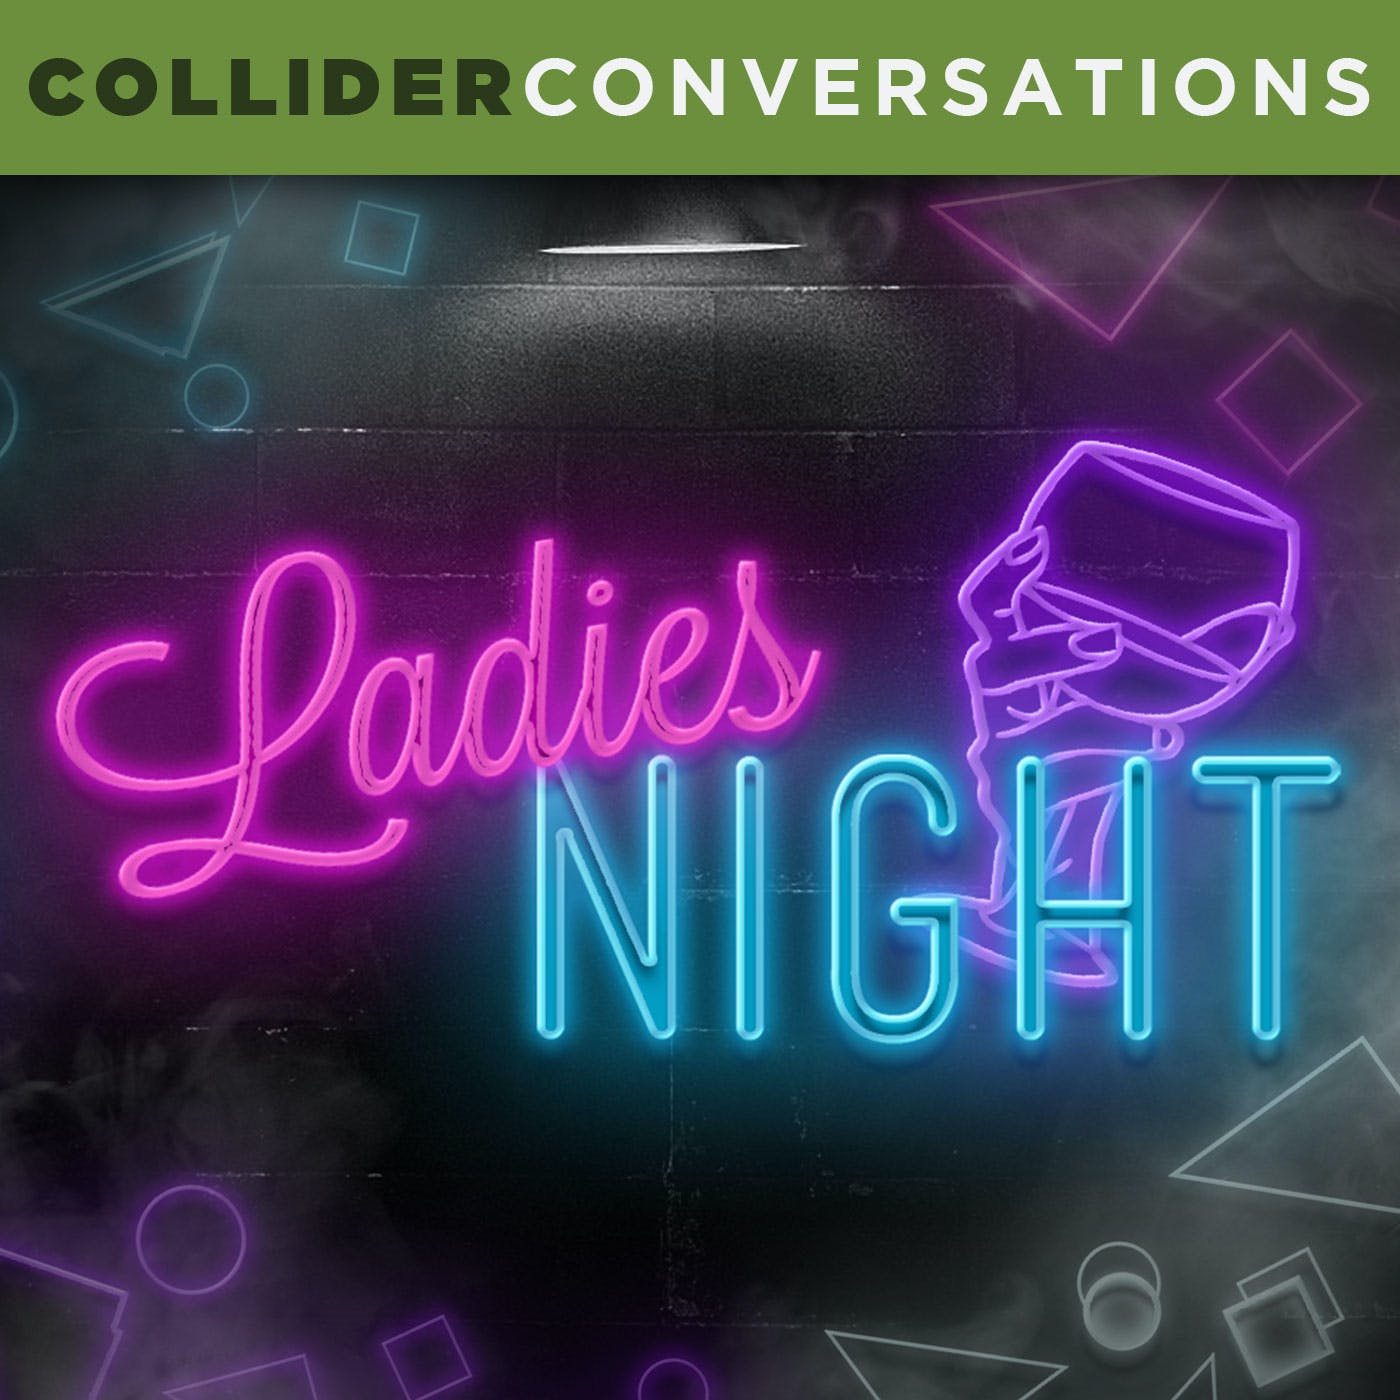 Katherine Langford on Her Journey to Cursed, Spontaneous and More - Collider Ladies Night